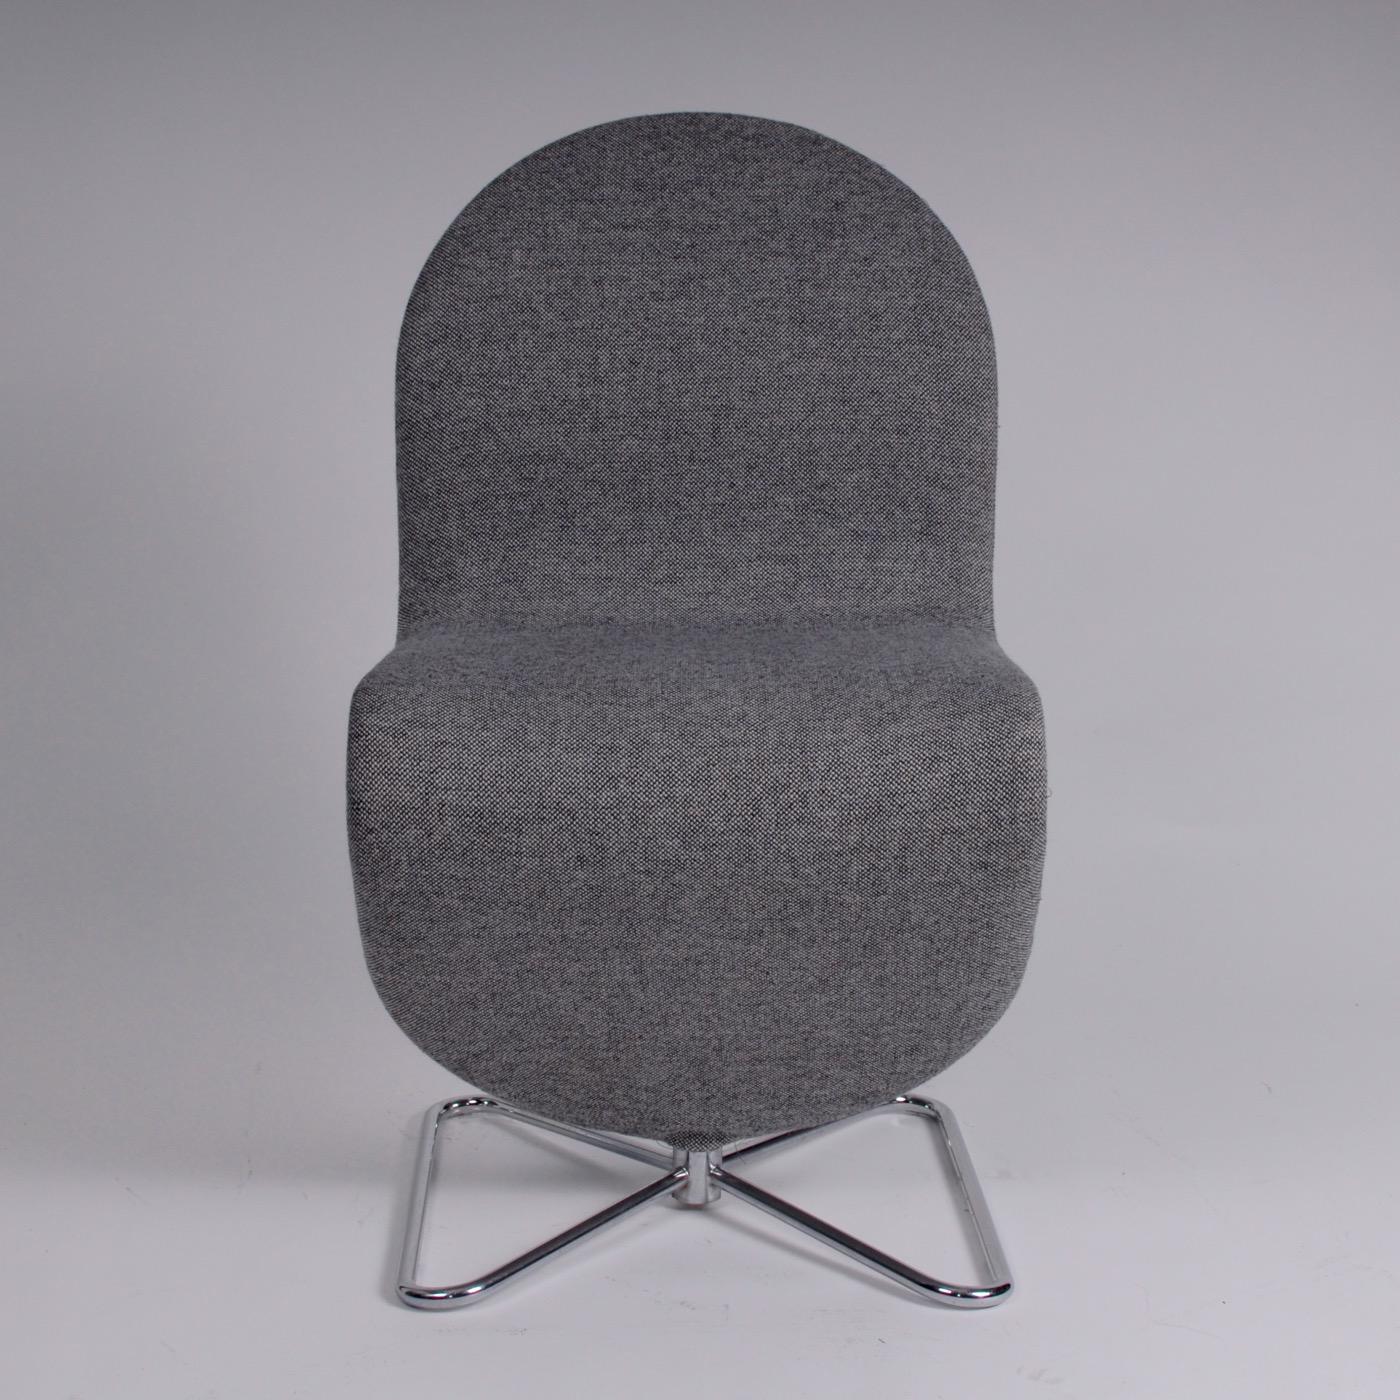 Space Age Verner Panton Set of Four Chairs 123 Serie Fritz Hansen Wool Fabric 1